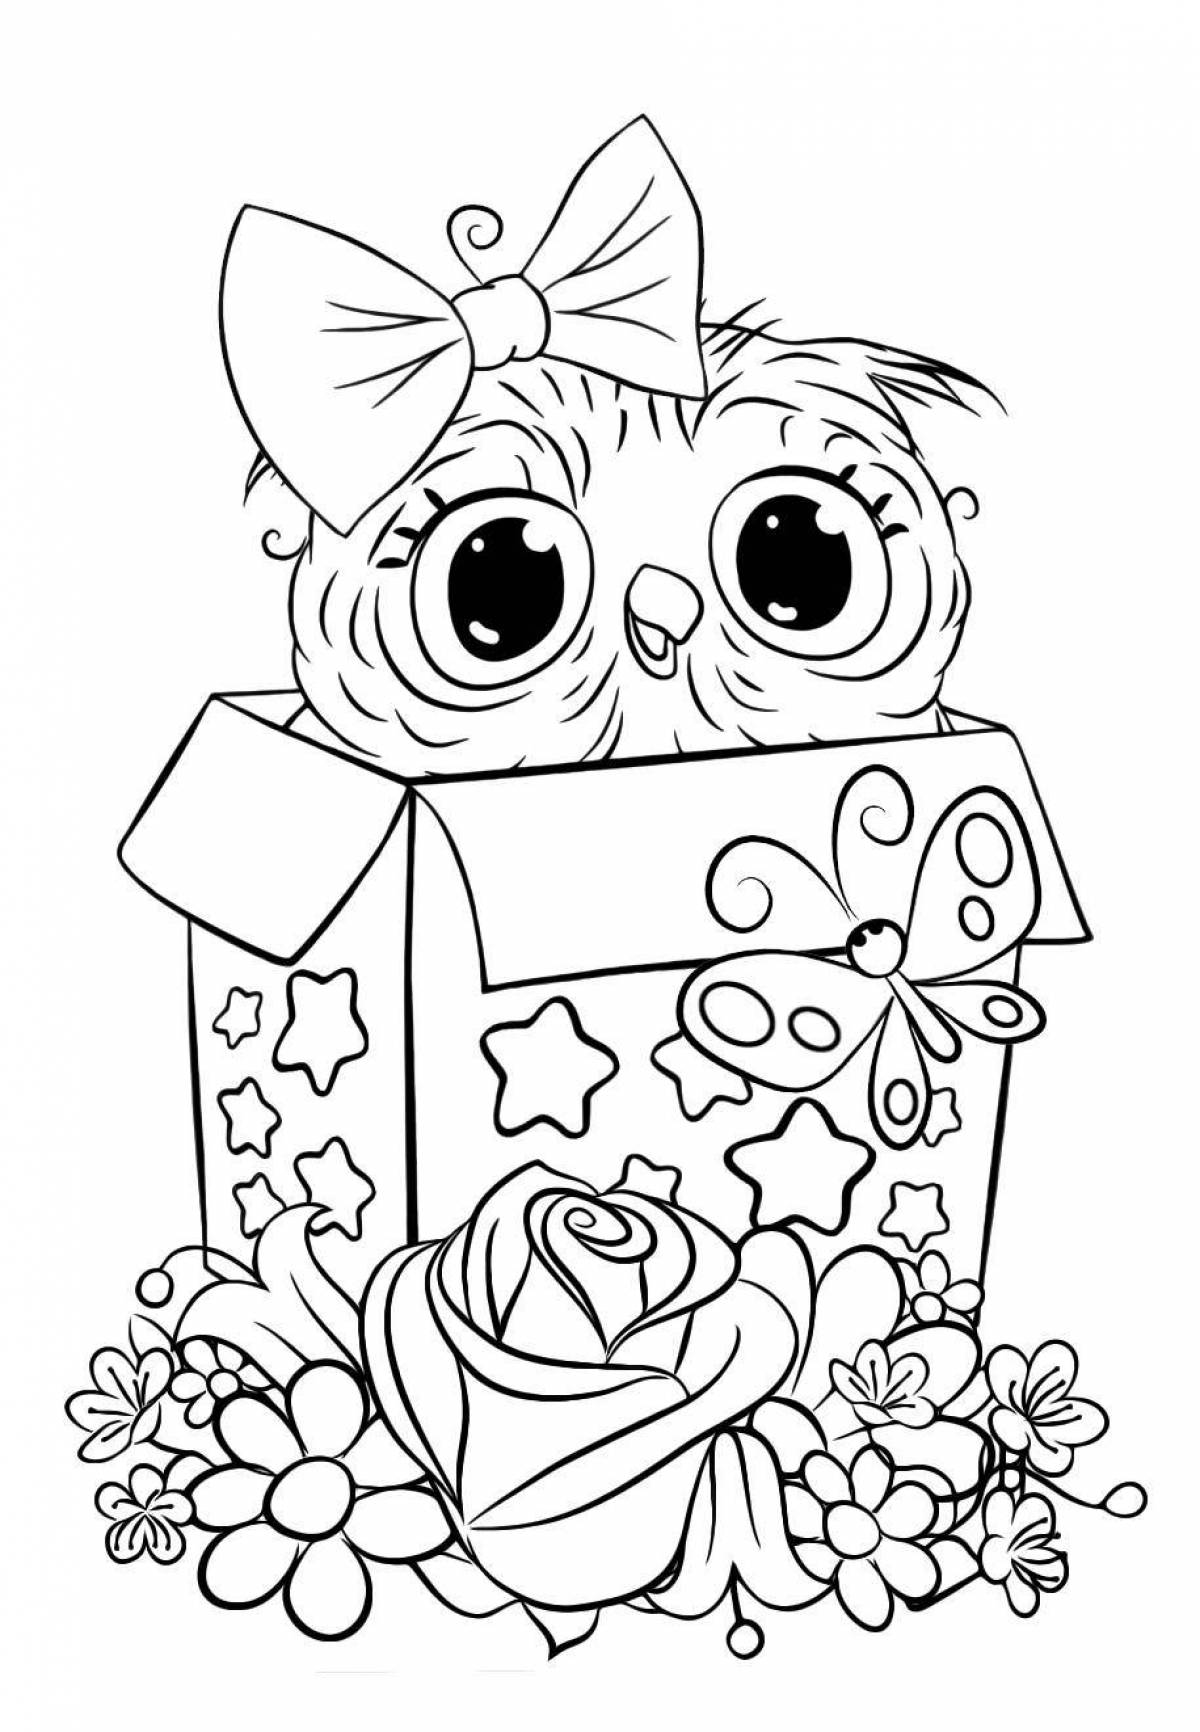 Quirky cute owl coloring book